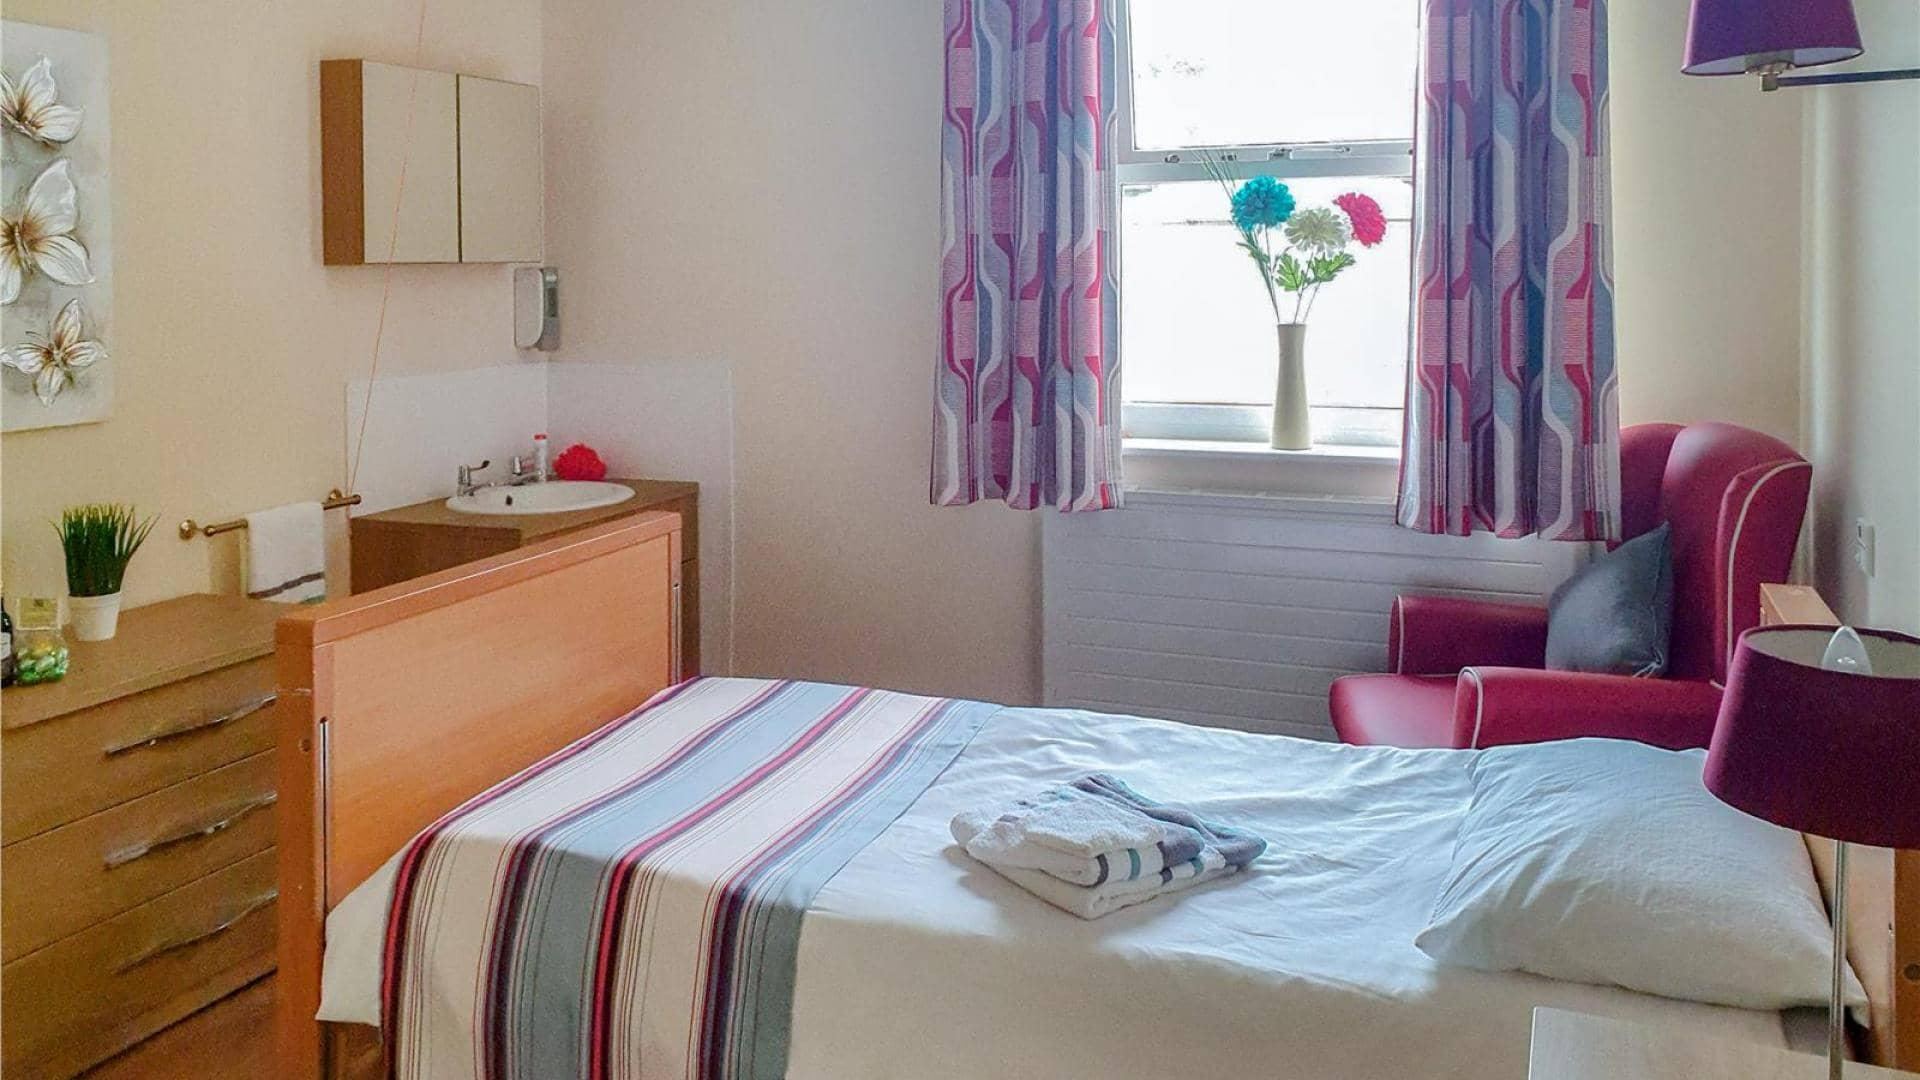 Lansbury court care home Bedroom